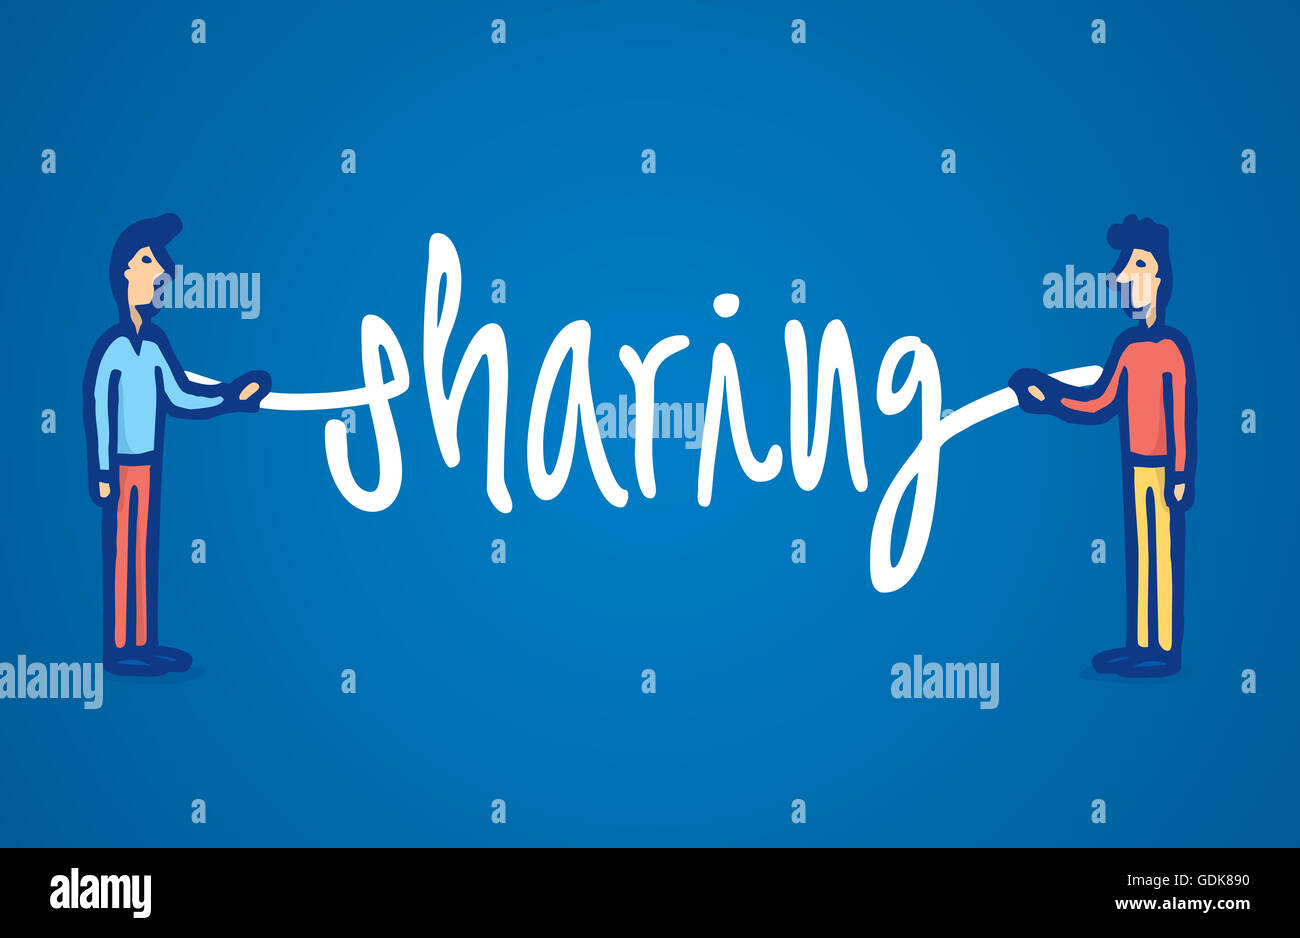 Cartoon illustration of two guys holding the word sharing together Stock Photo